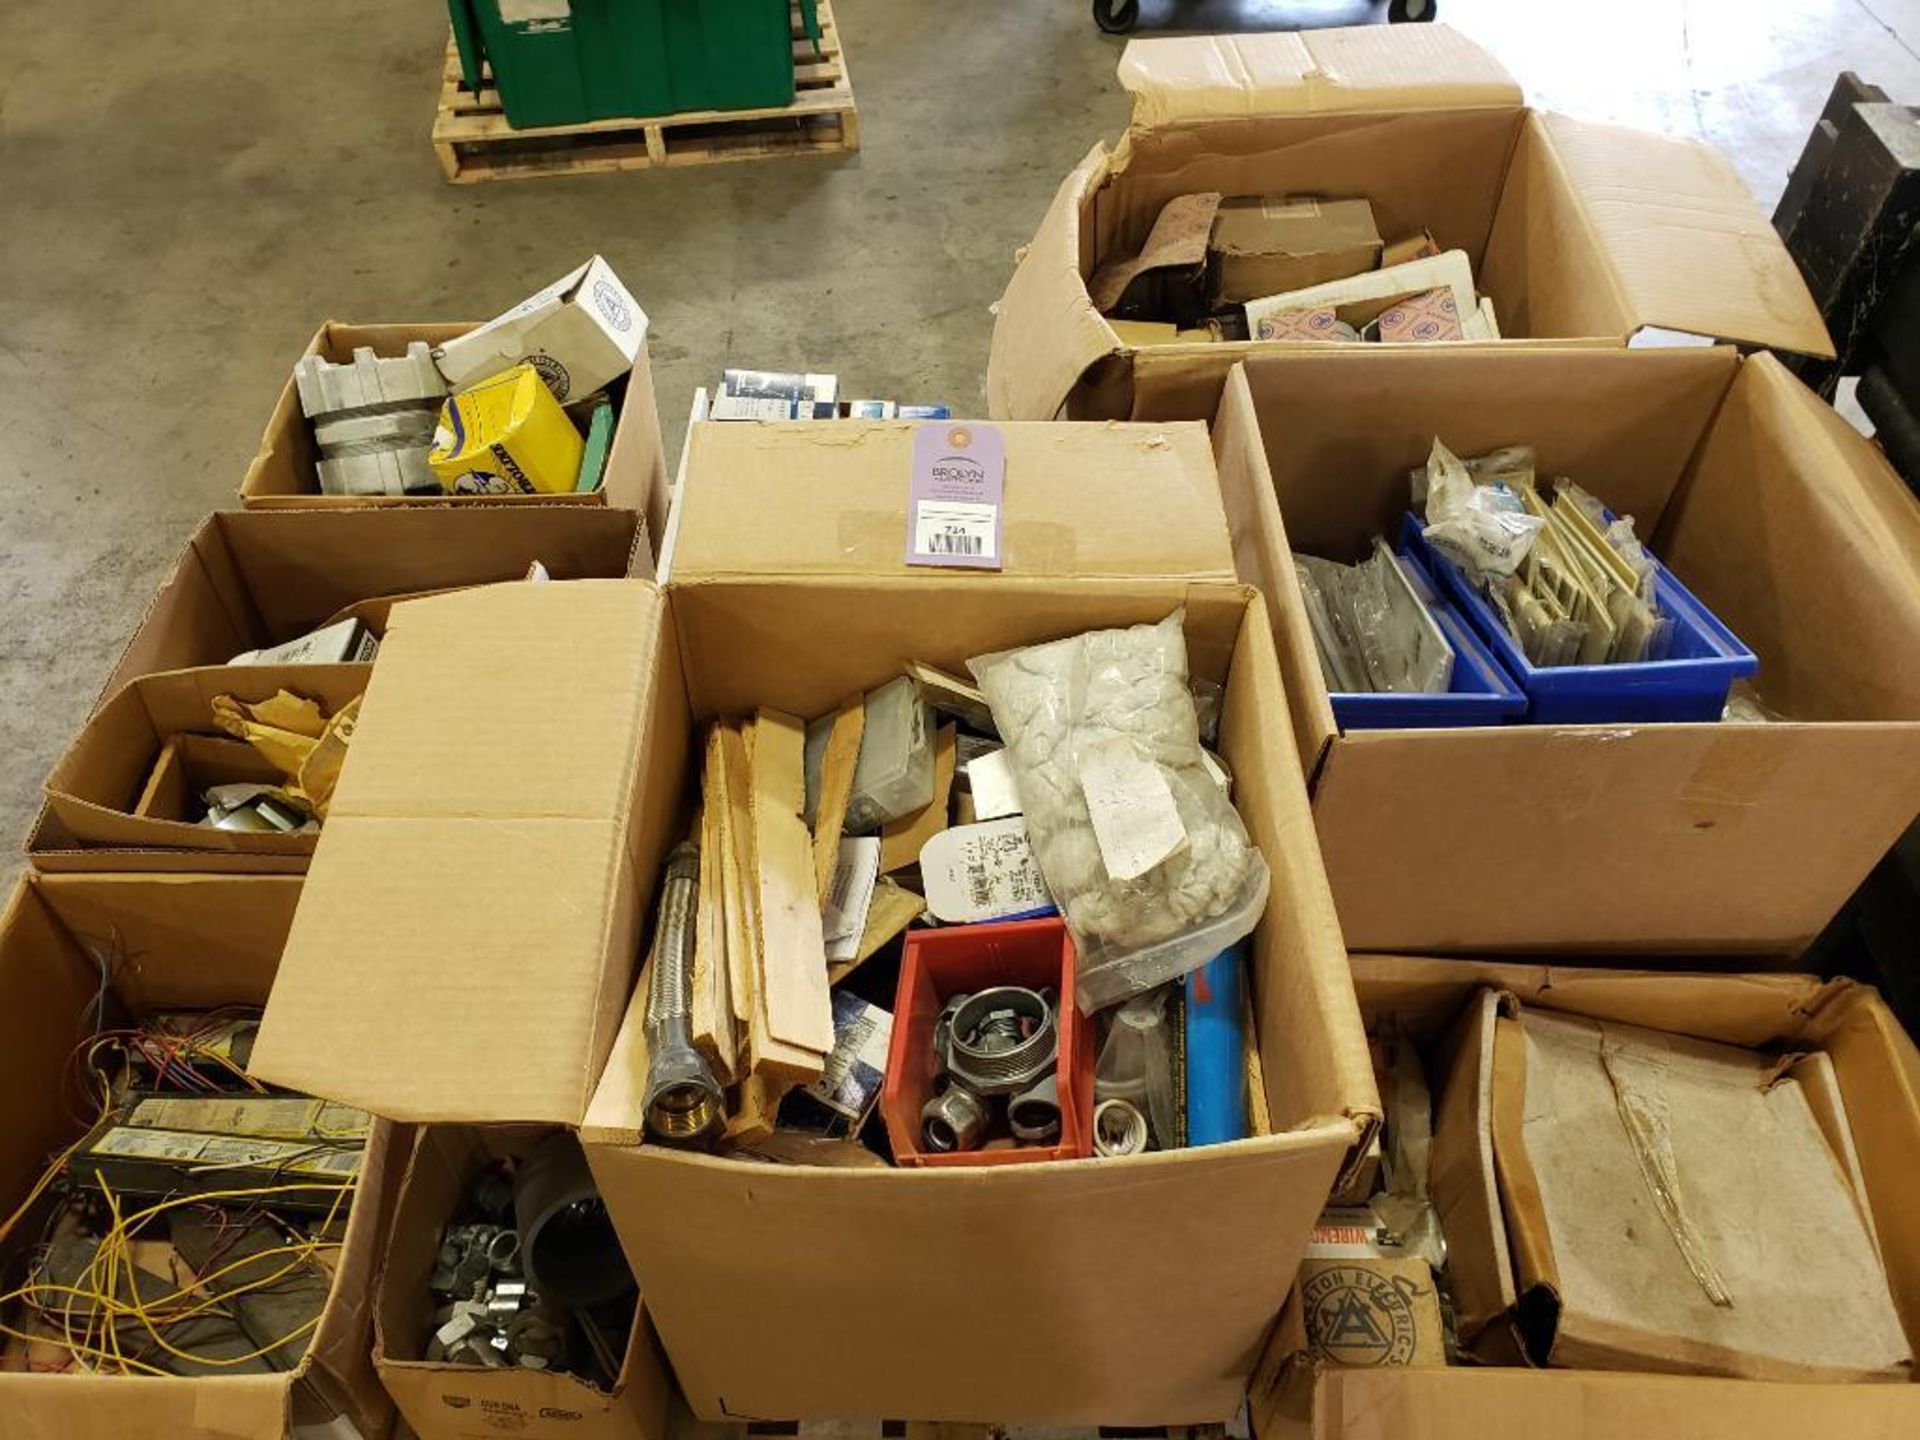 Pallet of assorted electrical hardware and construction equipment.